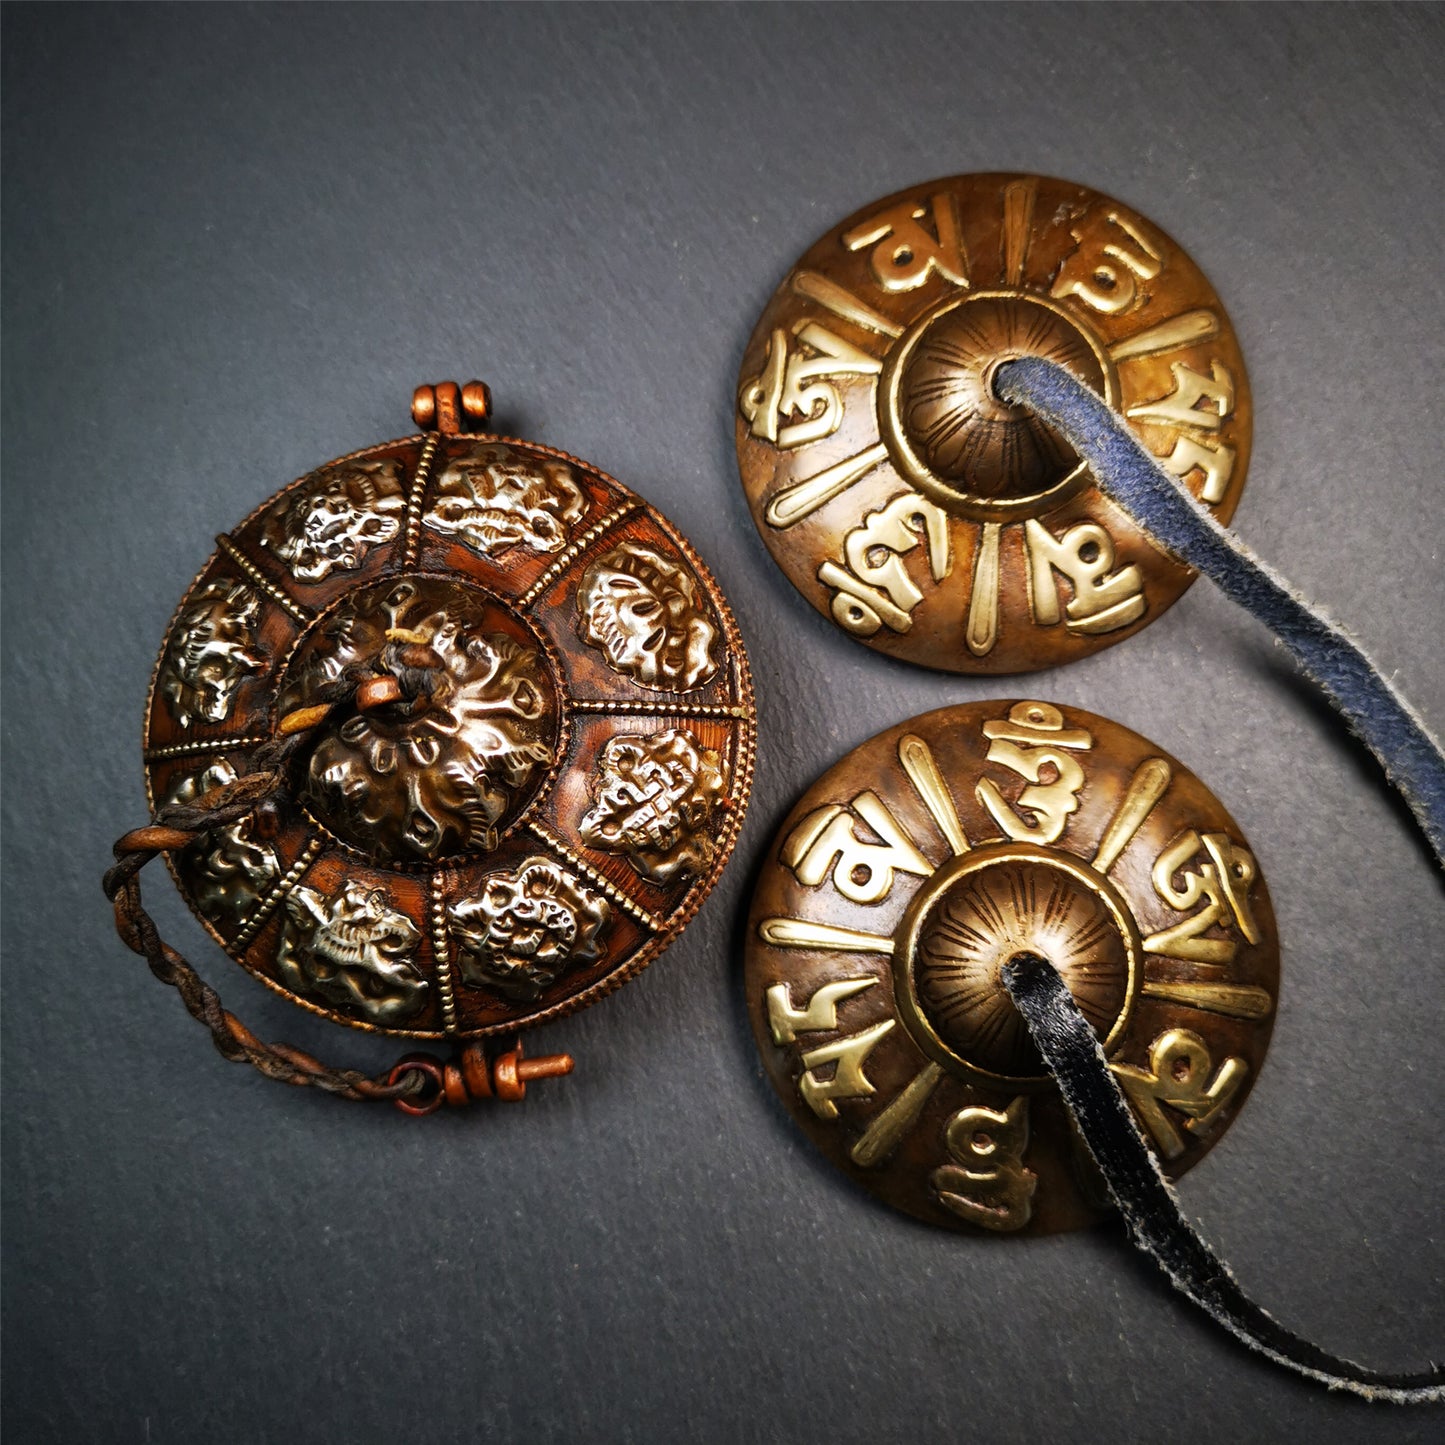 This tingsha bell set was handmade in Nepal,using traditional techniques and materials. It was made of bronze,carved om mani padme hum mantra,8cm diameter,with pure, clear and resonant,good for meditation. Come with tingsha case.